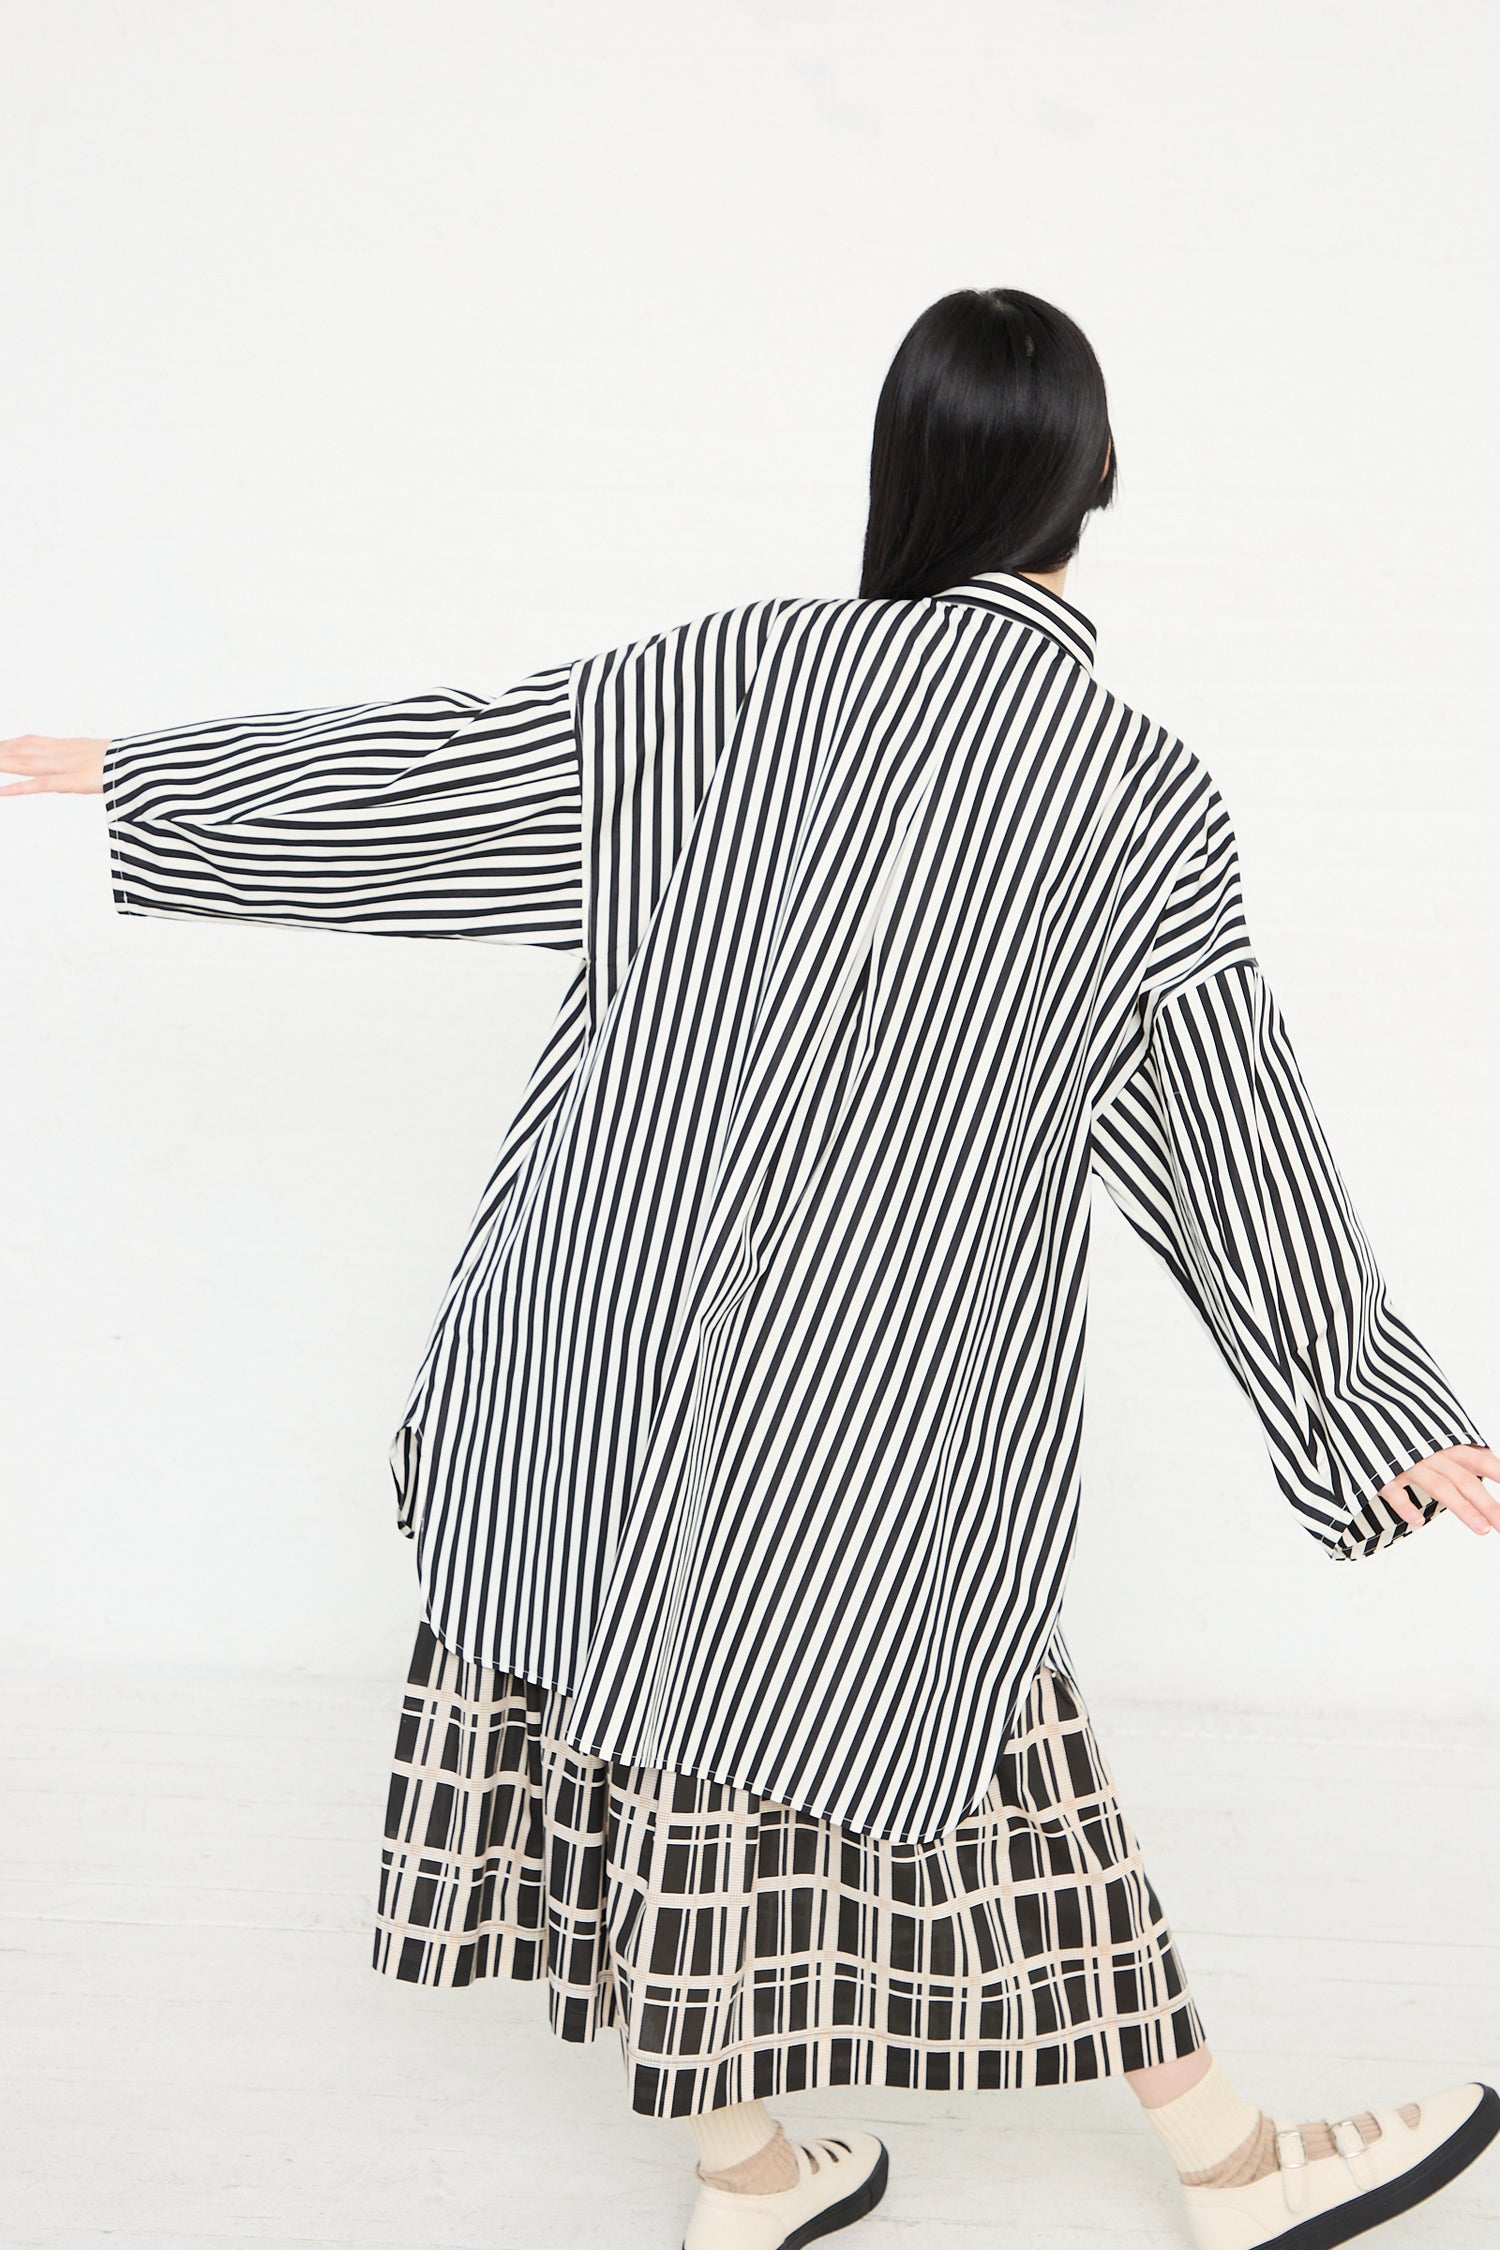 Woman posing in a KasMaria Cotton Poplin Oversized Smock Dress in Stripe and patterned skirt with her back to the camera and arms extended.